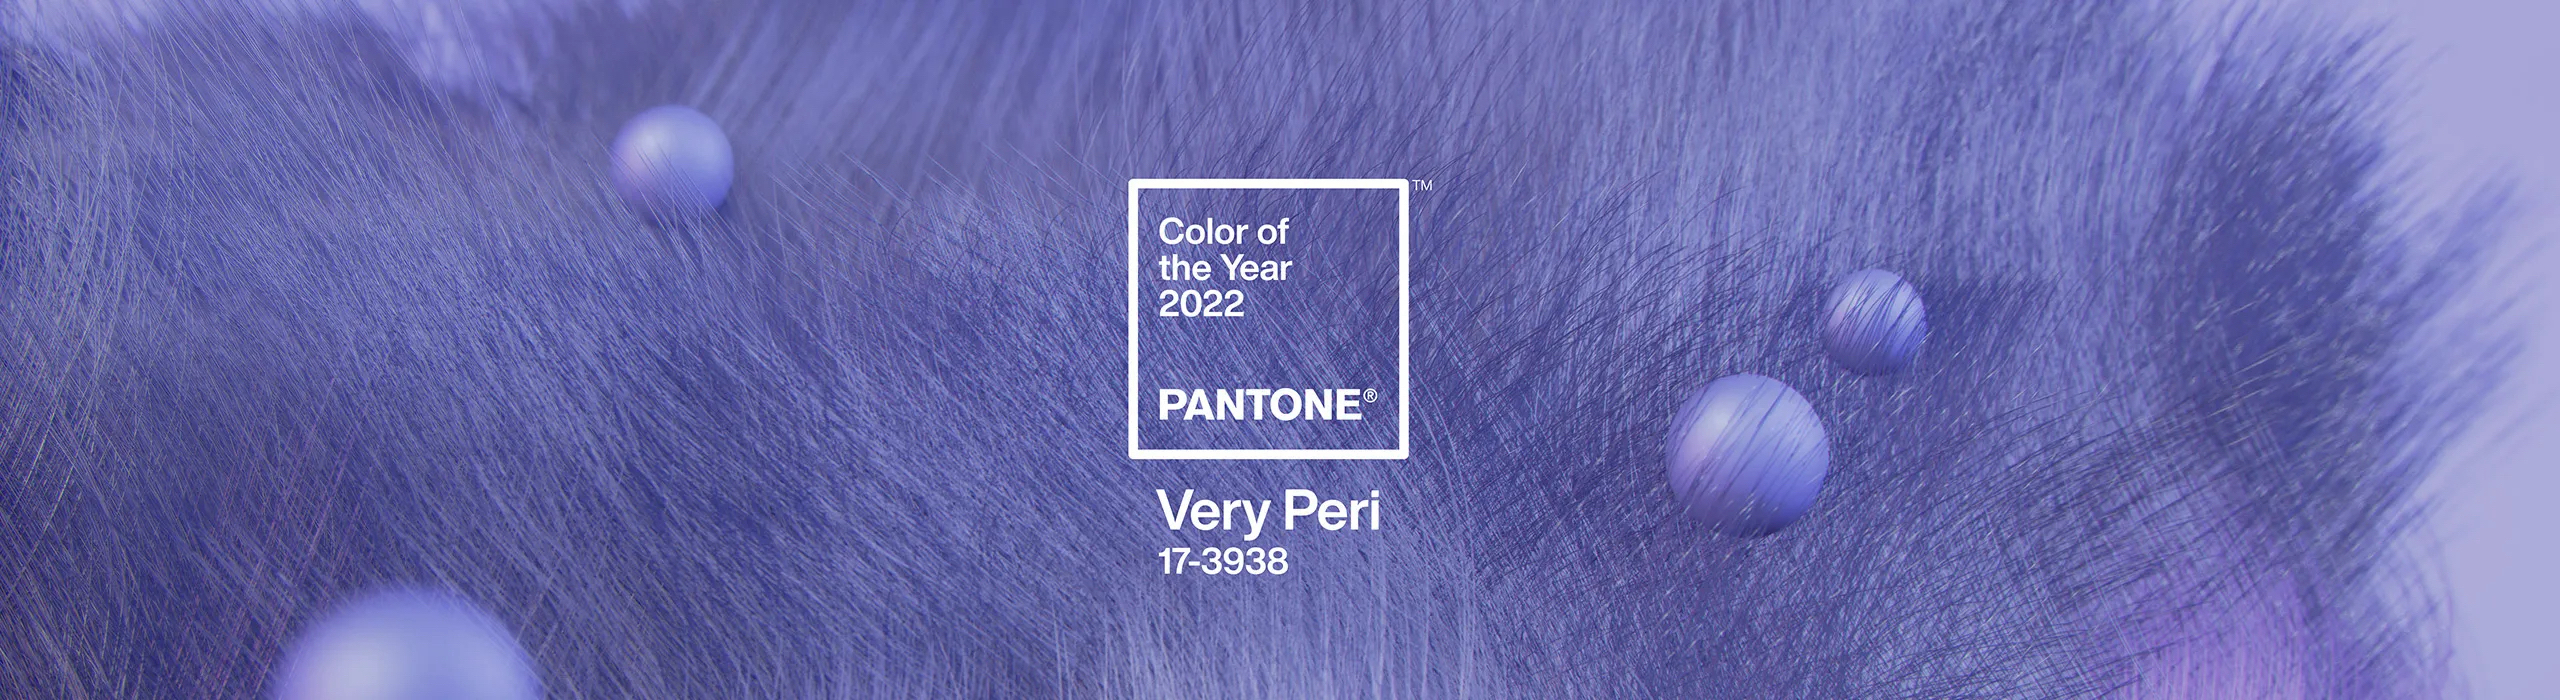 Pantone Names “Very Peri” Color of the Year for 2022